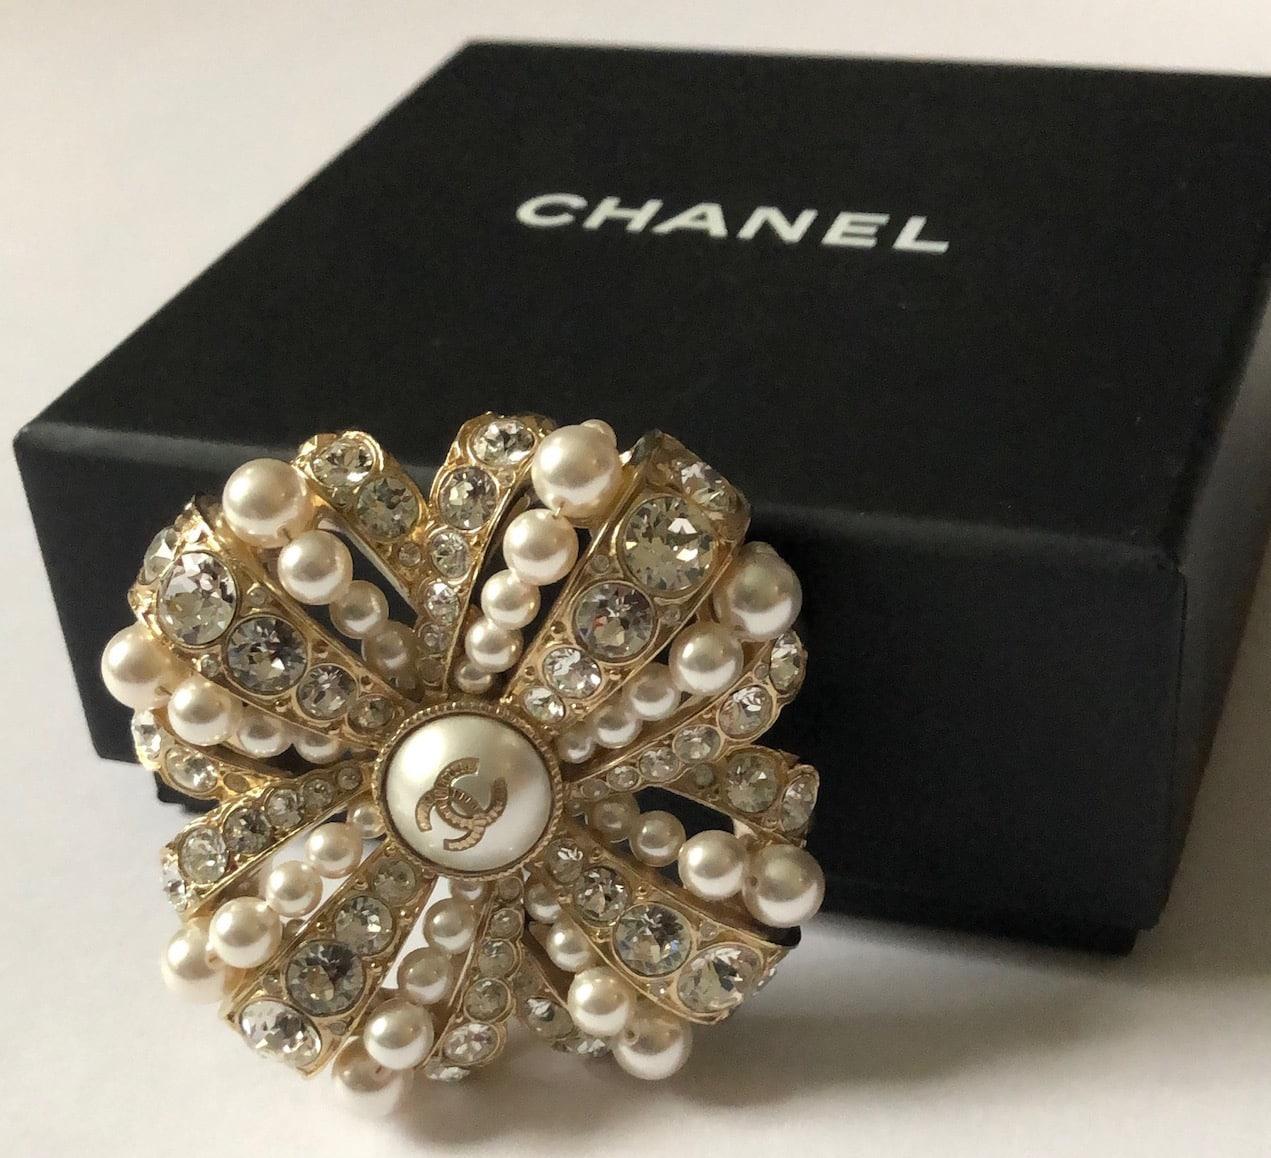 Chanel Pink White Striped Cc Enamel Brooch Auction